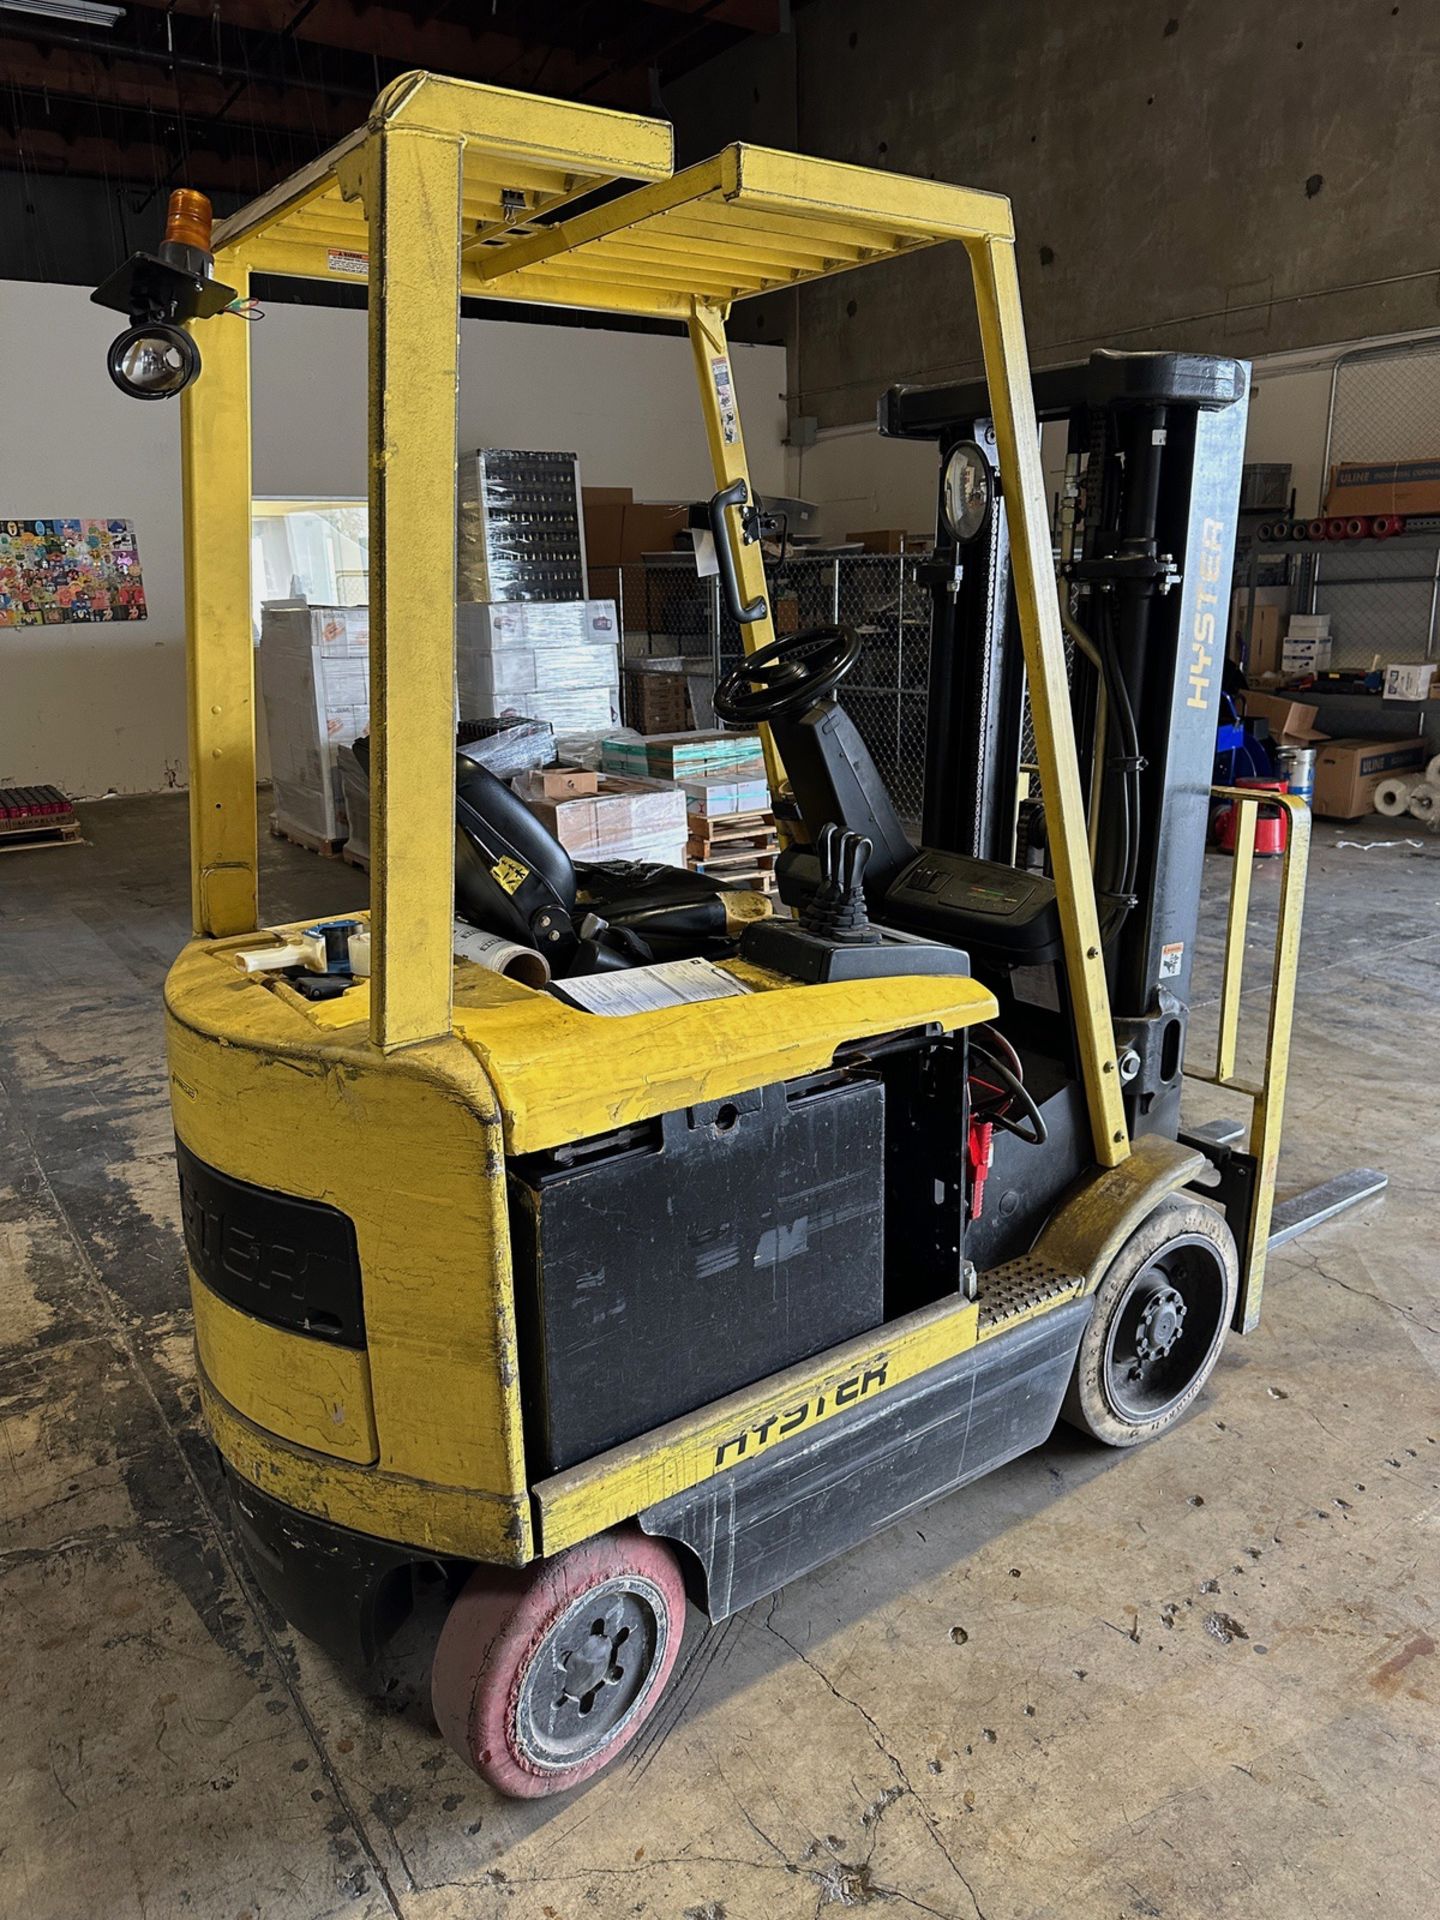 Hyster Electric Fork Truck, Model E45Z-33, S/N G108N06015E (Warehouse) | Rig Fee $50 - Image 2 of 3